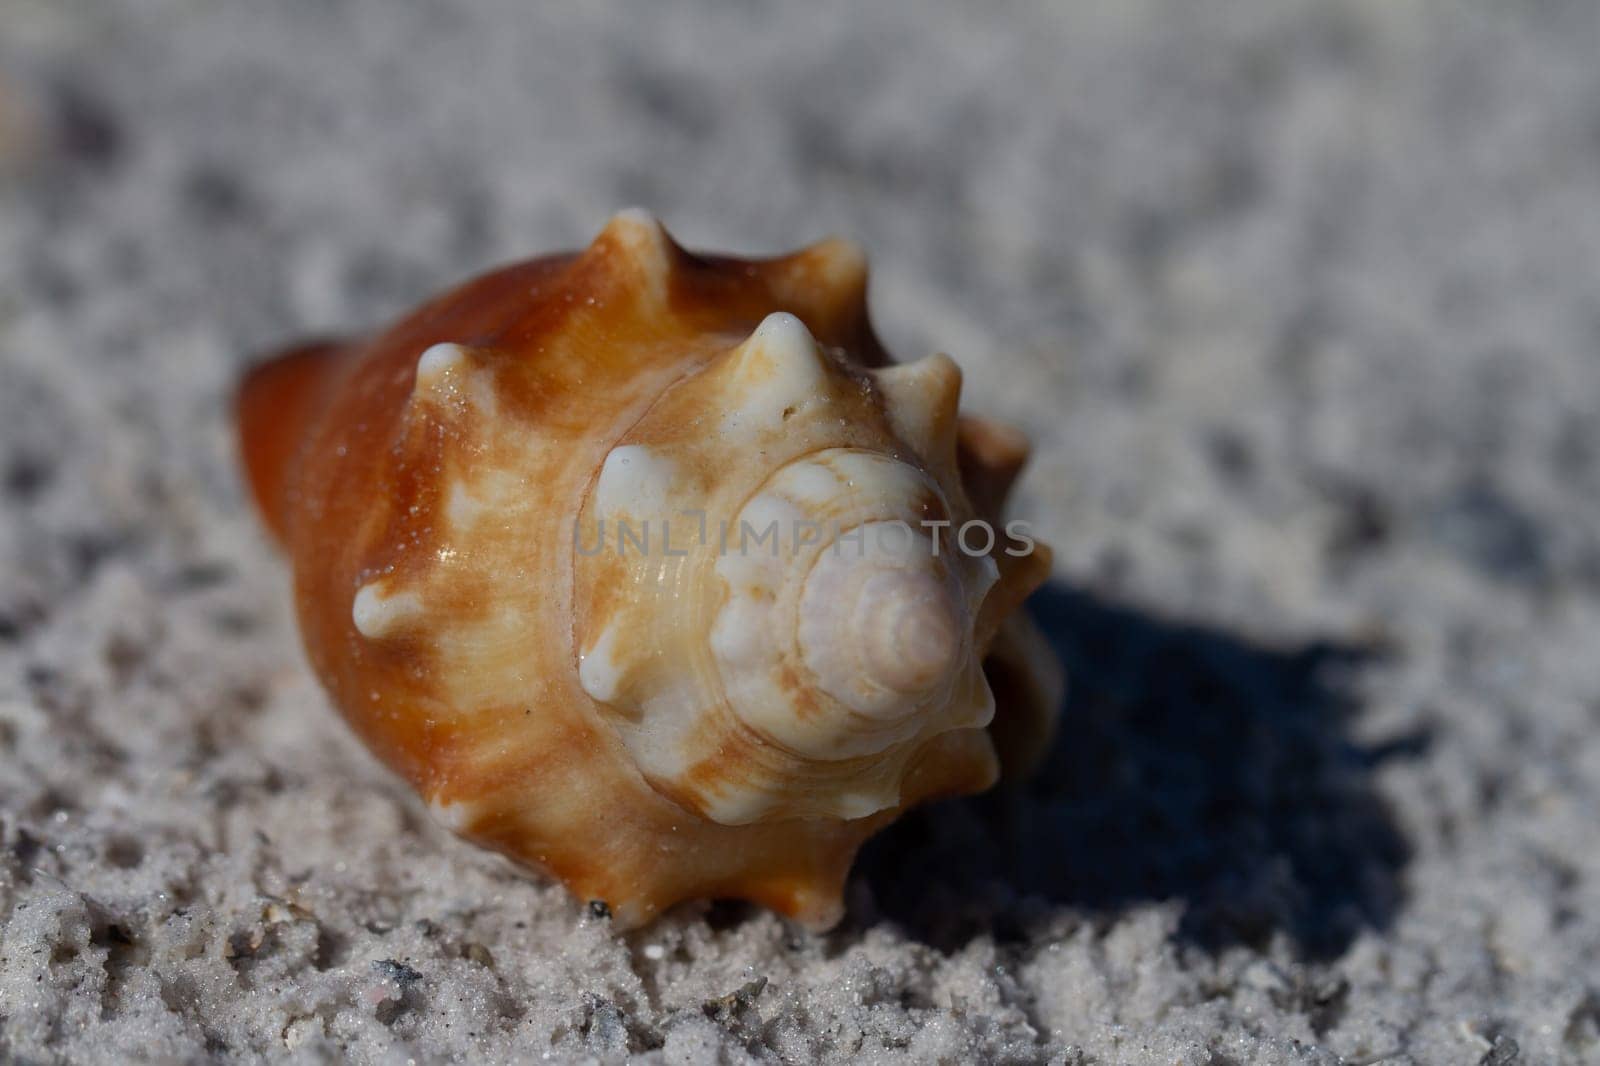 Front view of a Florida fighting conch, Strombus alatus, found on a beach, Naples Florida, United States